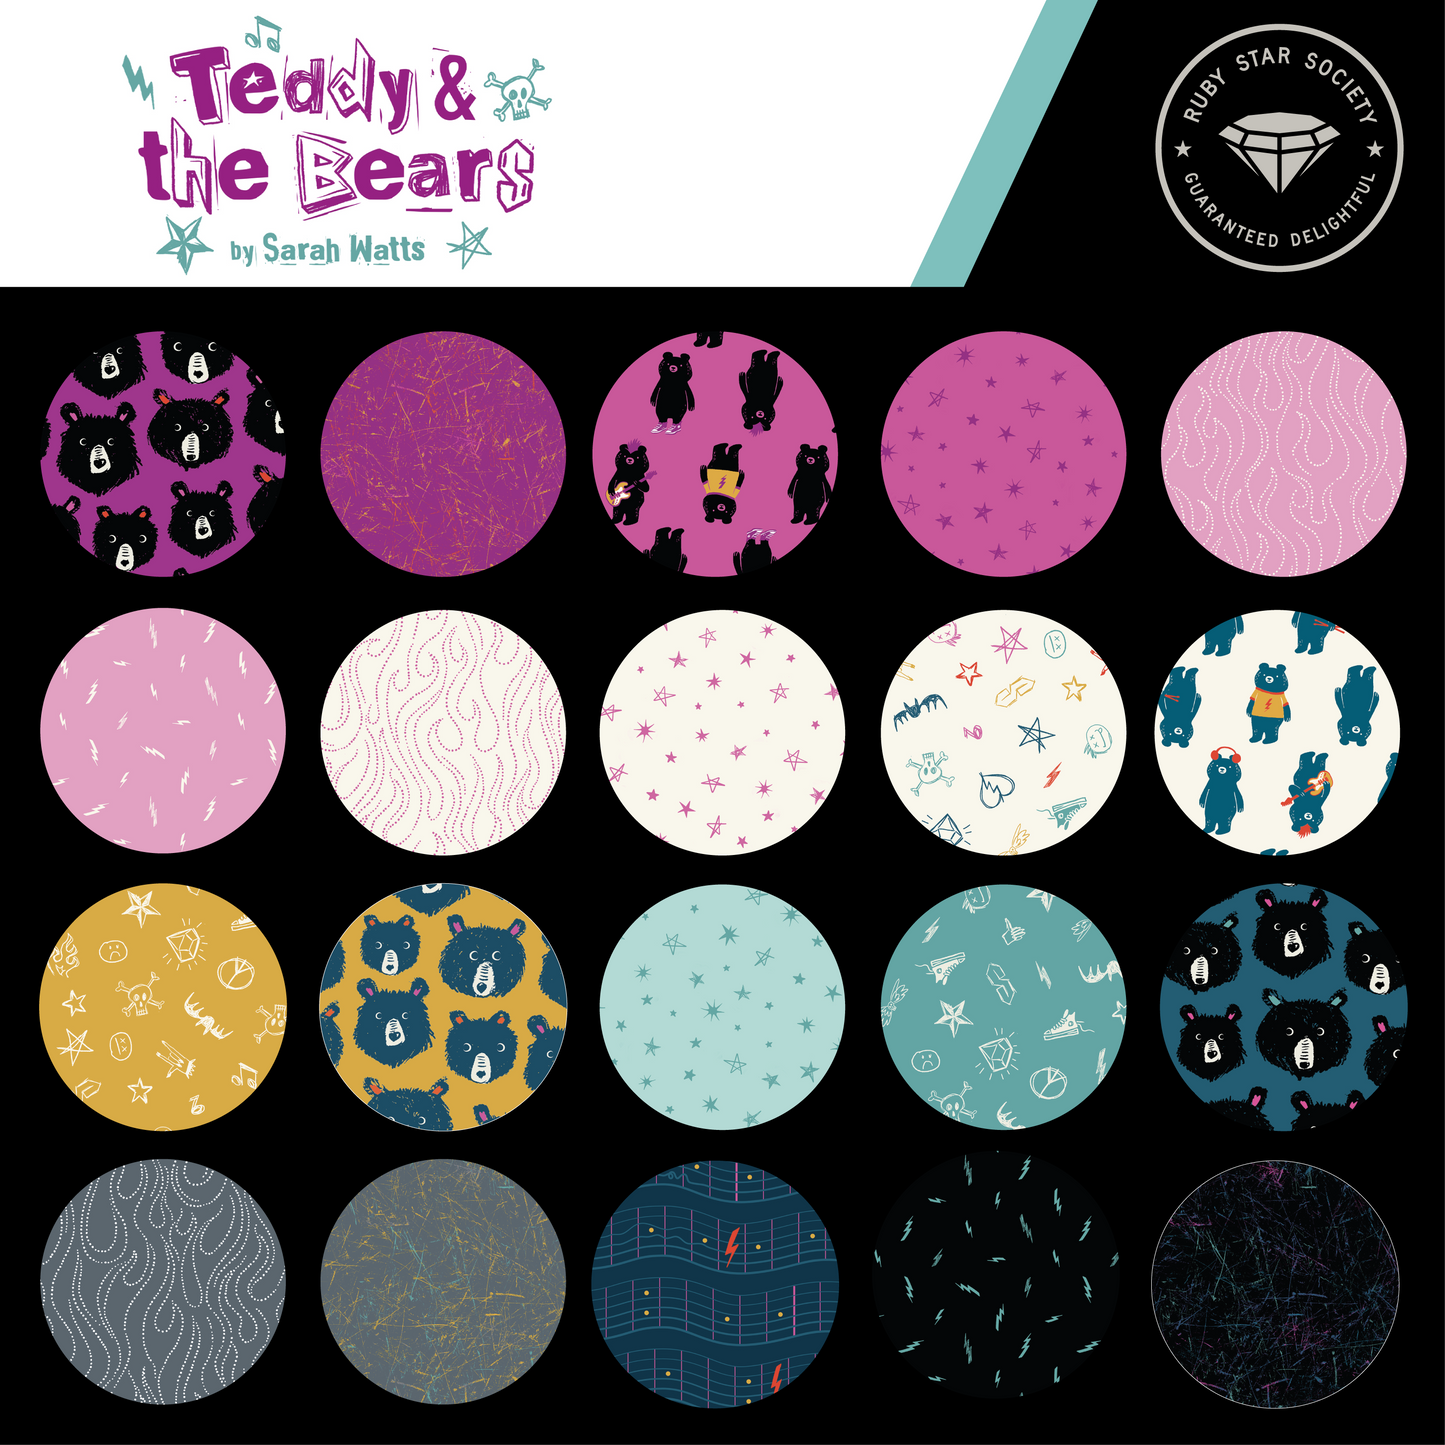 Teddy & the Bears by Sarah Watts - Electric Multi RS2107 12